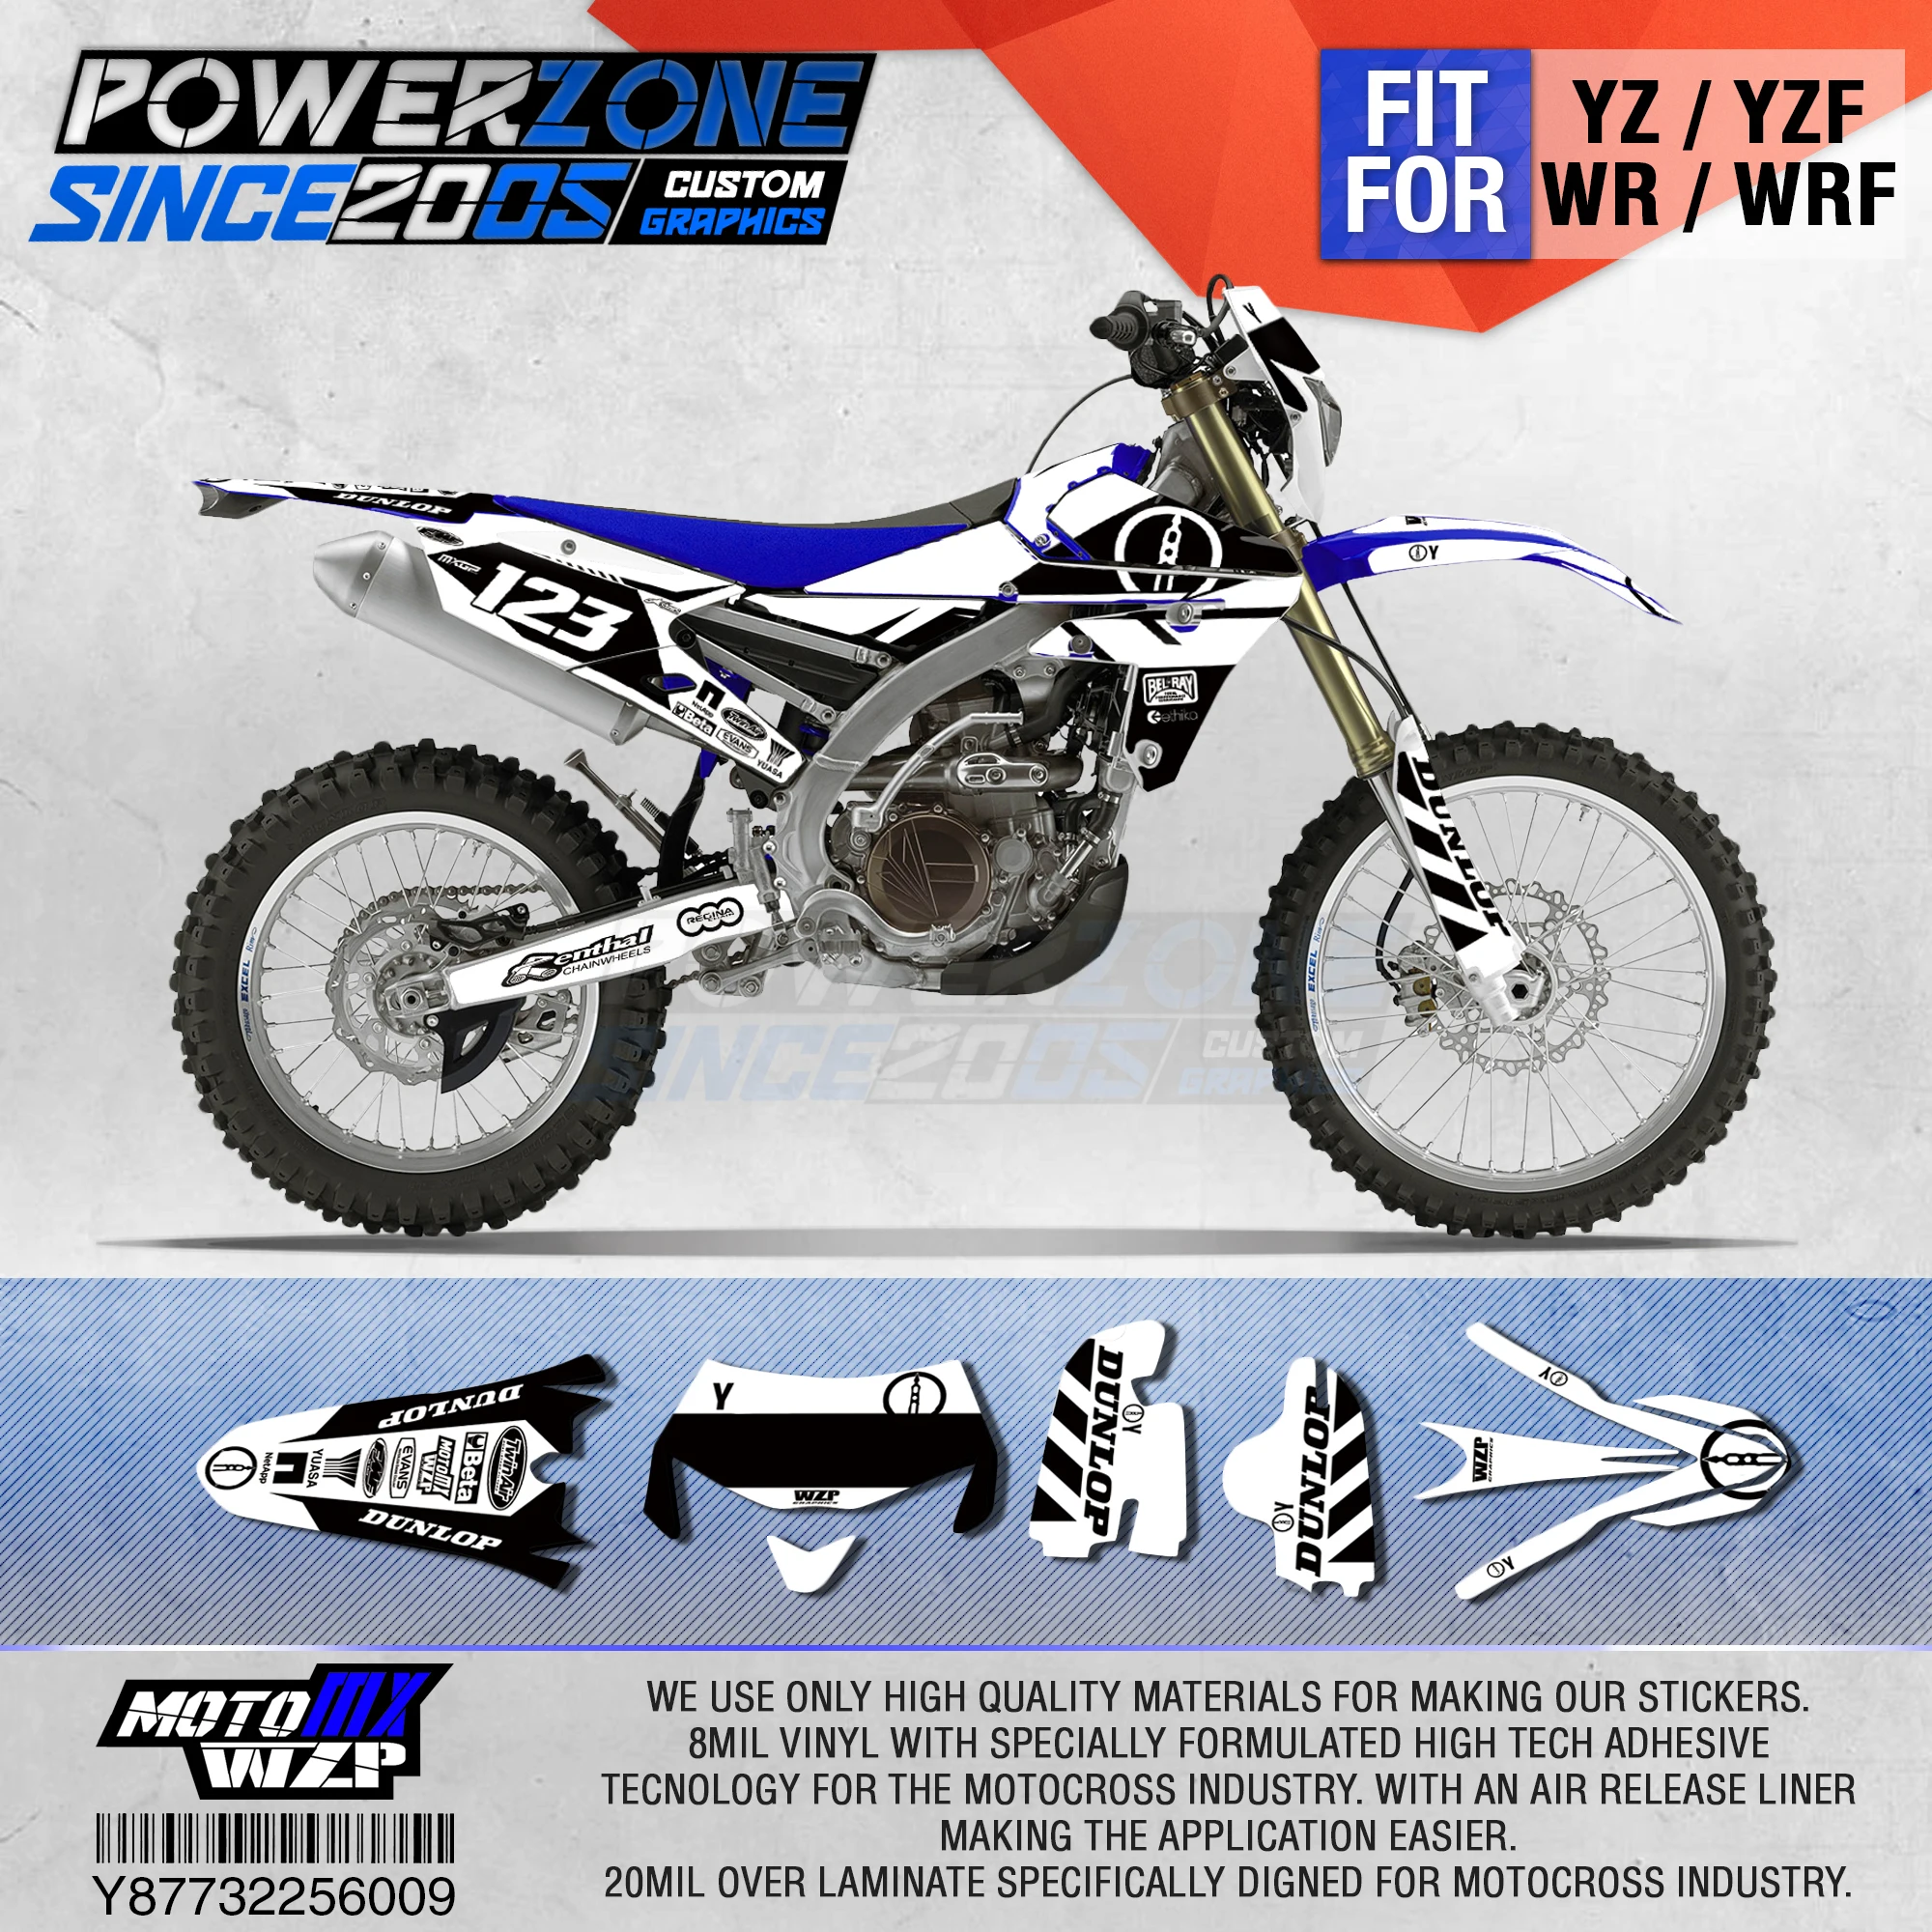 

PowerZone Customized Team Graphics Backgrounds Decals 3M Custom Stickers For YAMAHA WR450F WR WRF 450cc 2016 2017 2018 2019 009